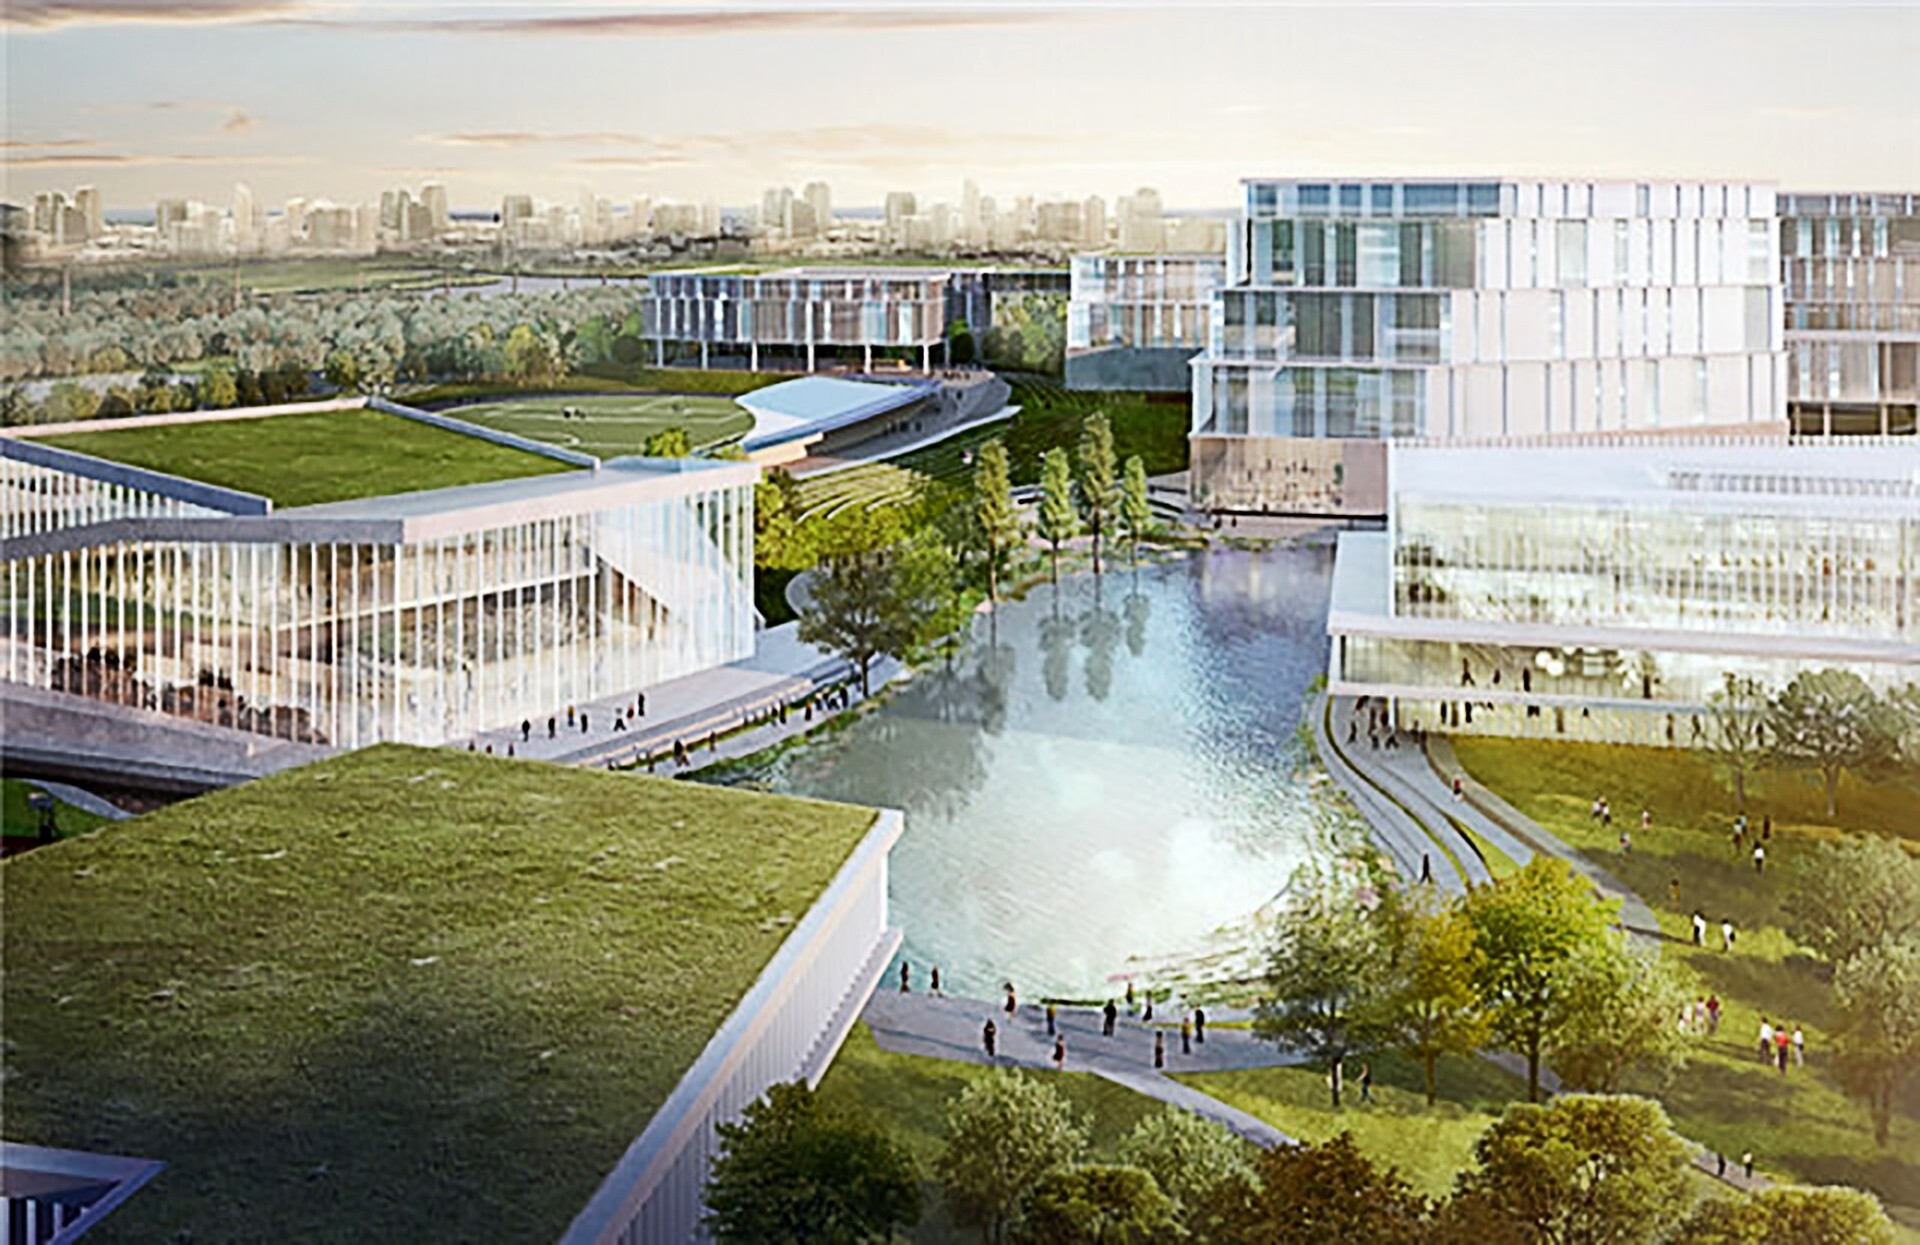 An artist’s impression of the Open University of Hong Kong’s Zhaoqing campus, which will be spread over 2,500 acres. Photo: Handout